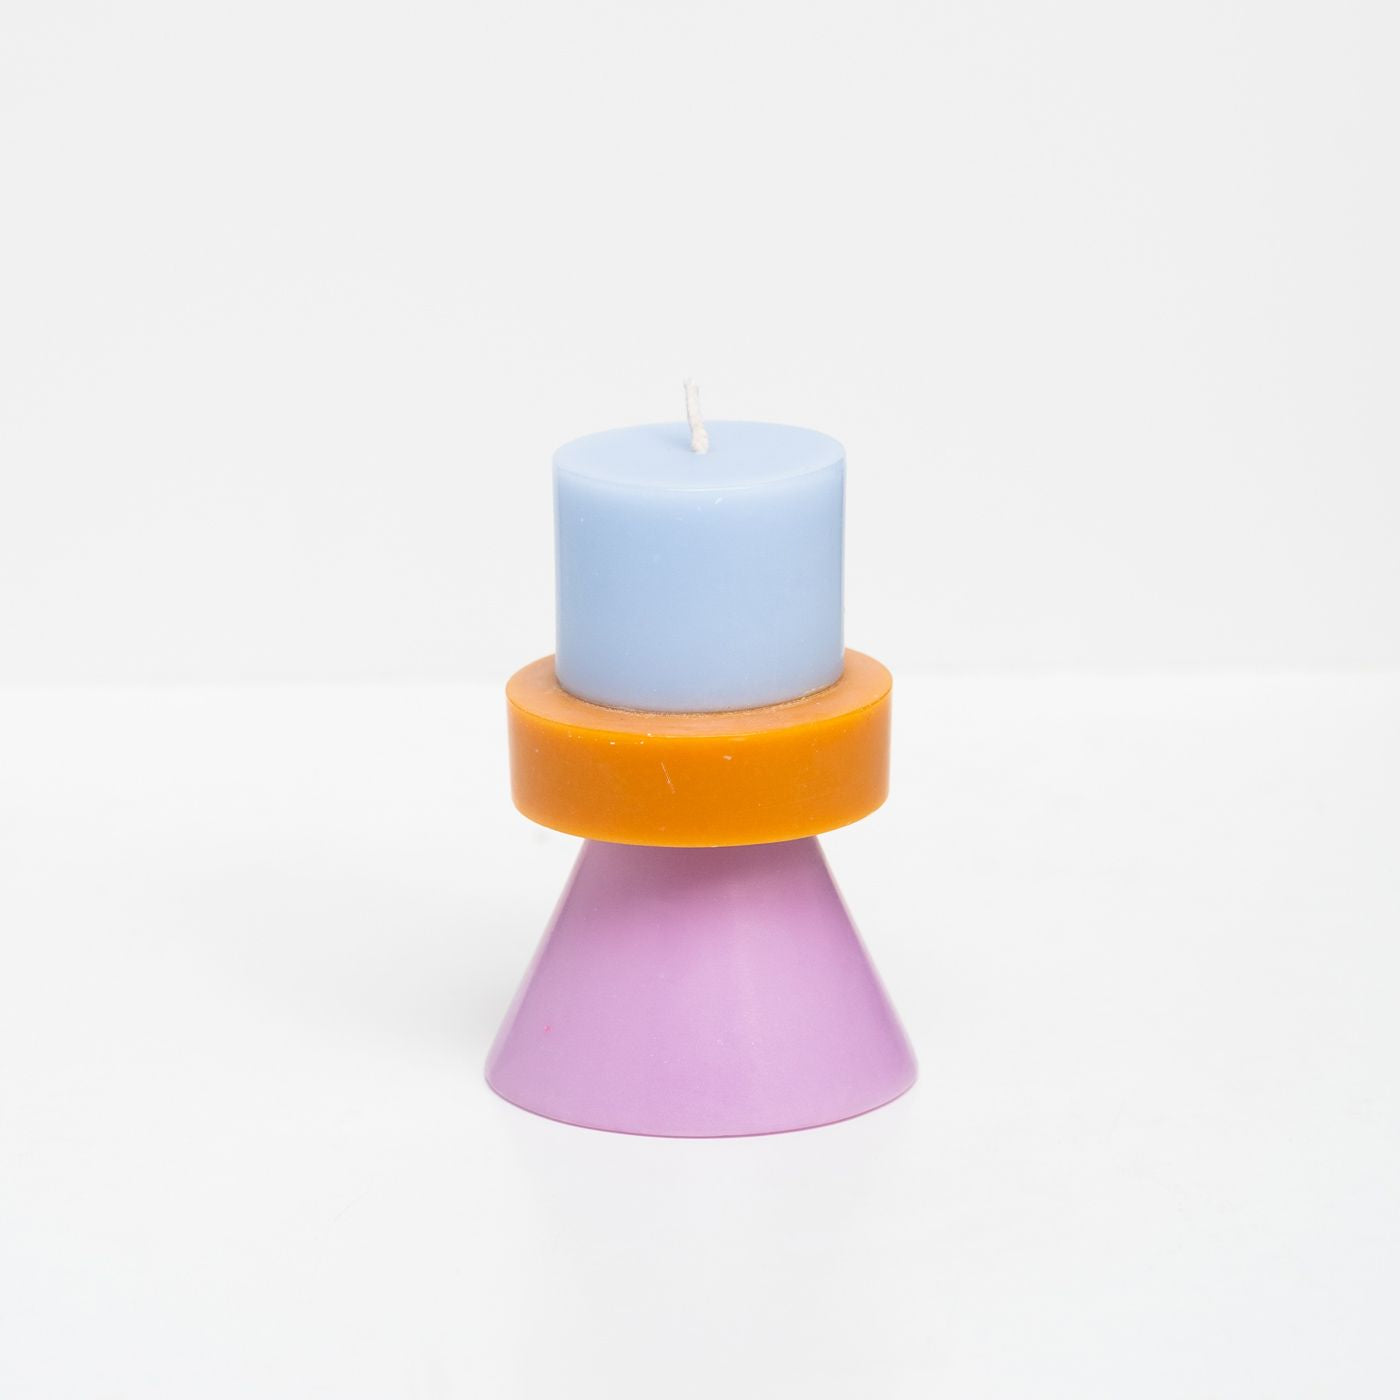 Stack Candle mini by Yod and co in blue, orange and purple